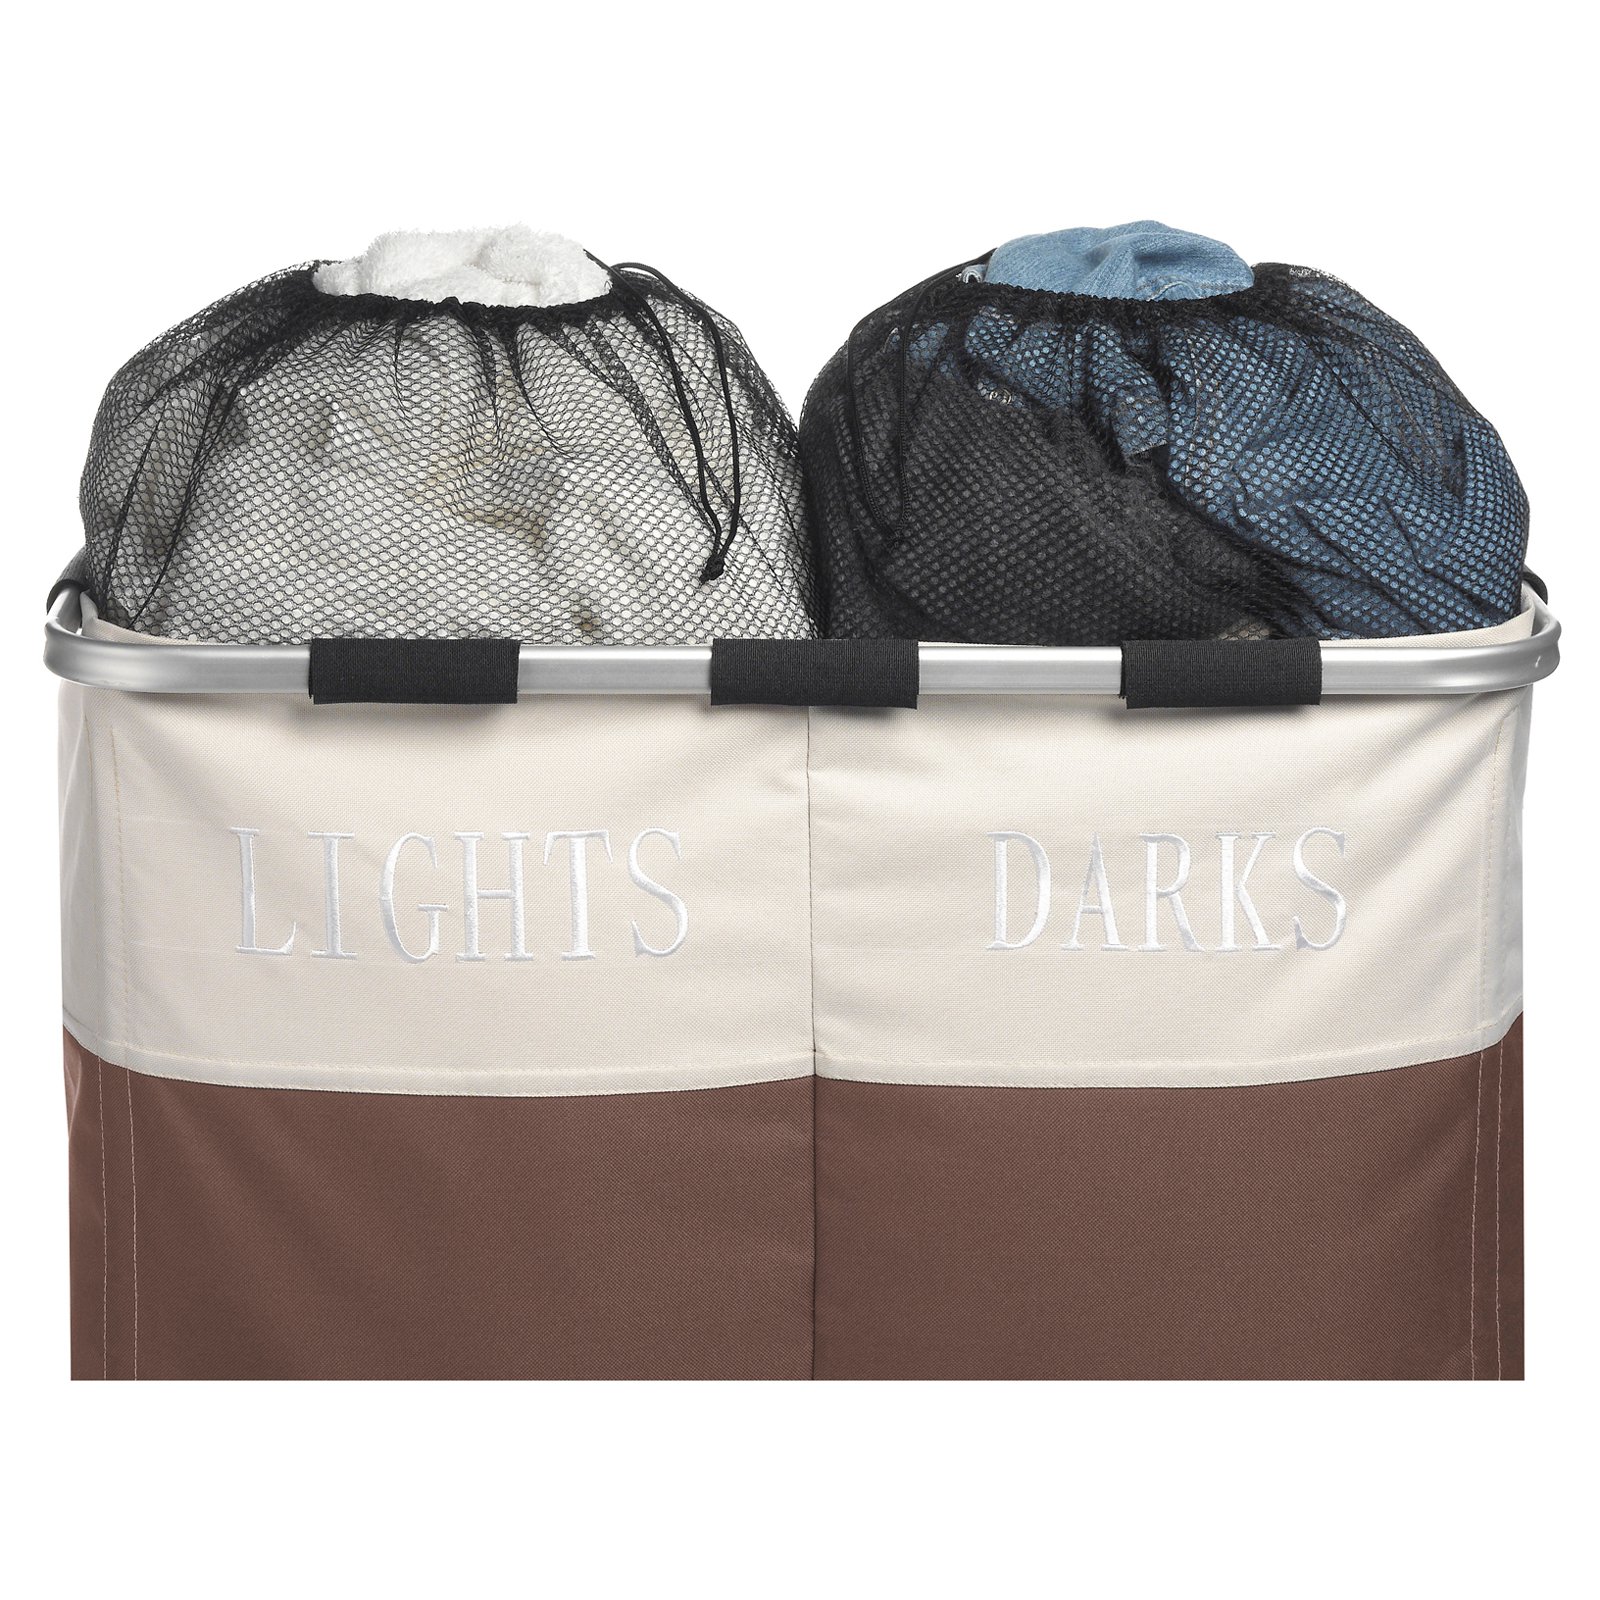 Whitmor Easycare Polyester Double Laundry Hamper - Lights and Darks Separator - Java - For Adult Use - image 4 of 7